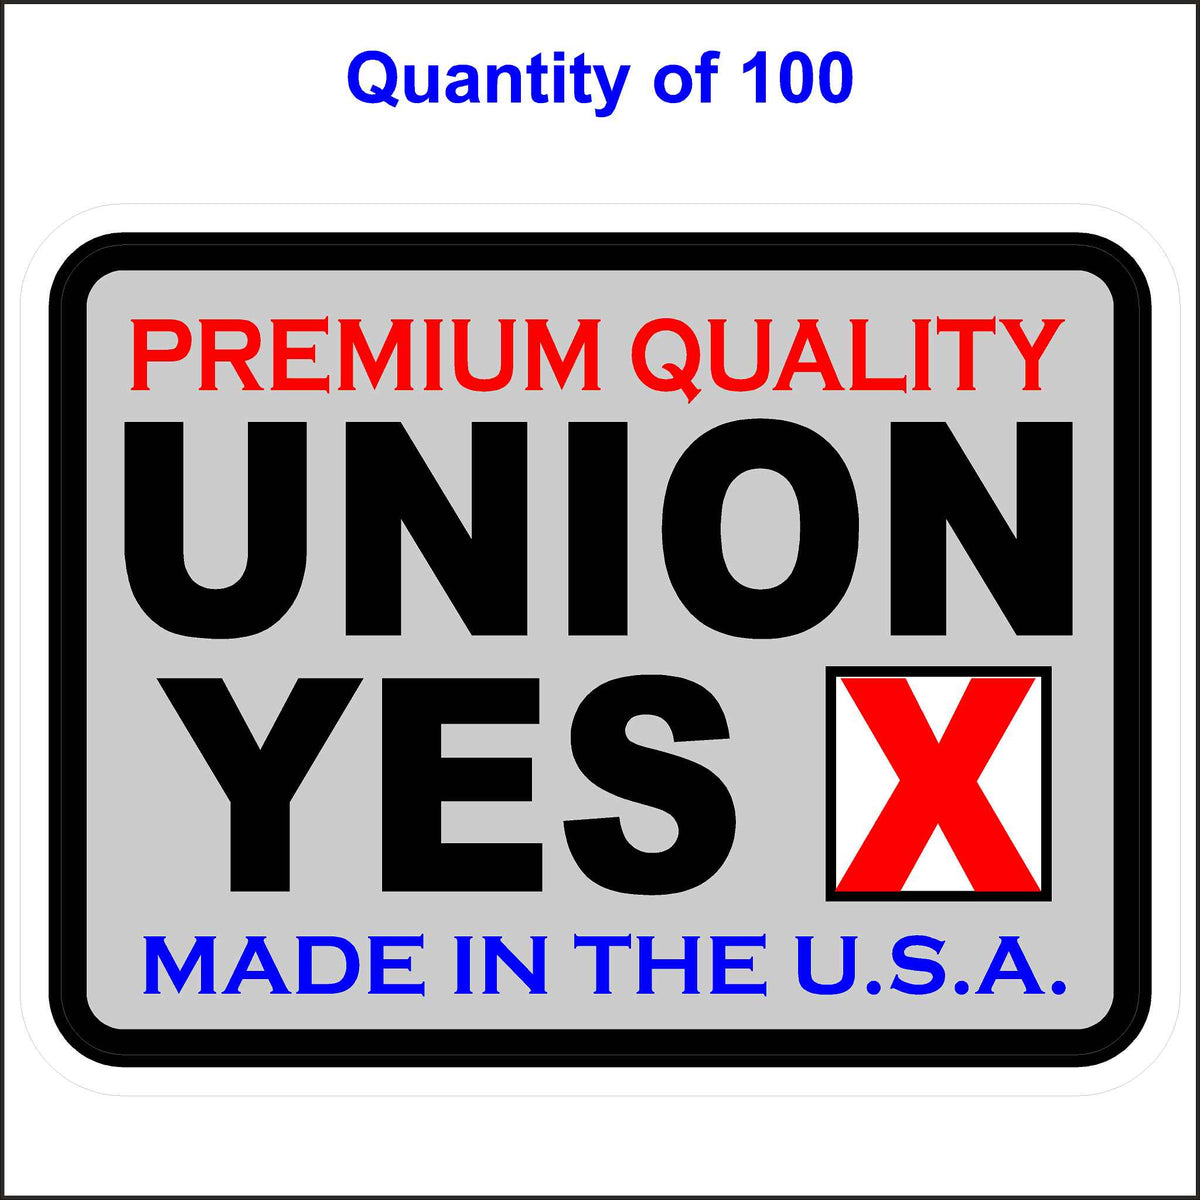 Union Stickers Made in the USA Premium Quality Union Yes. 100 Quantity.